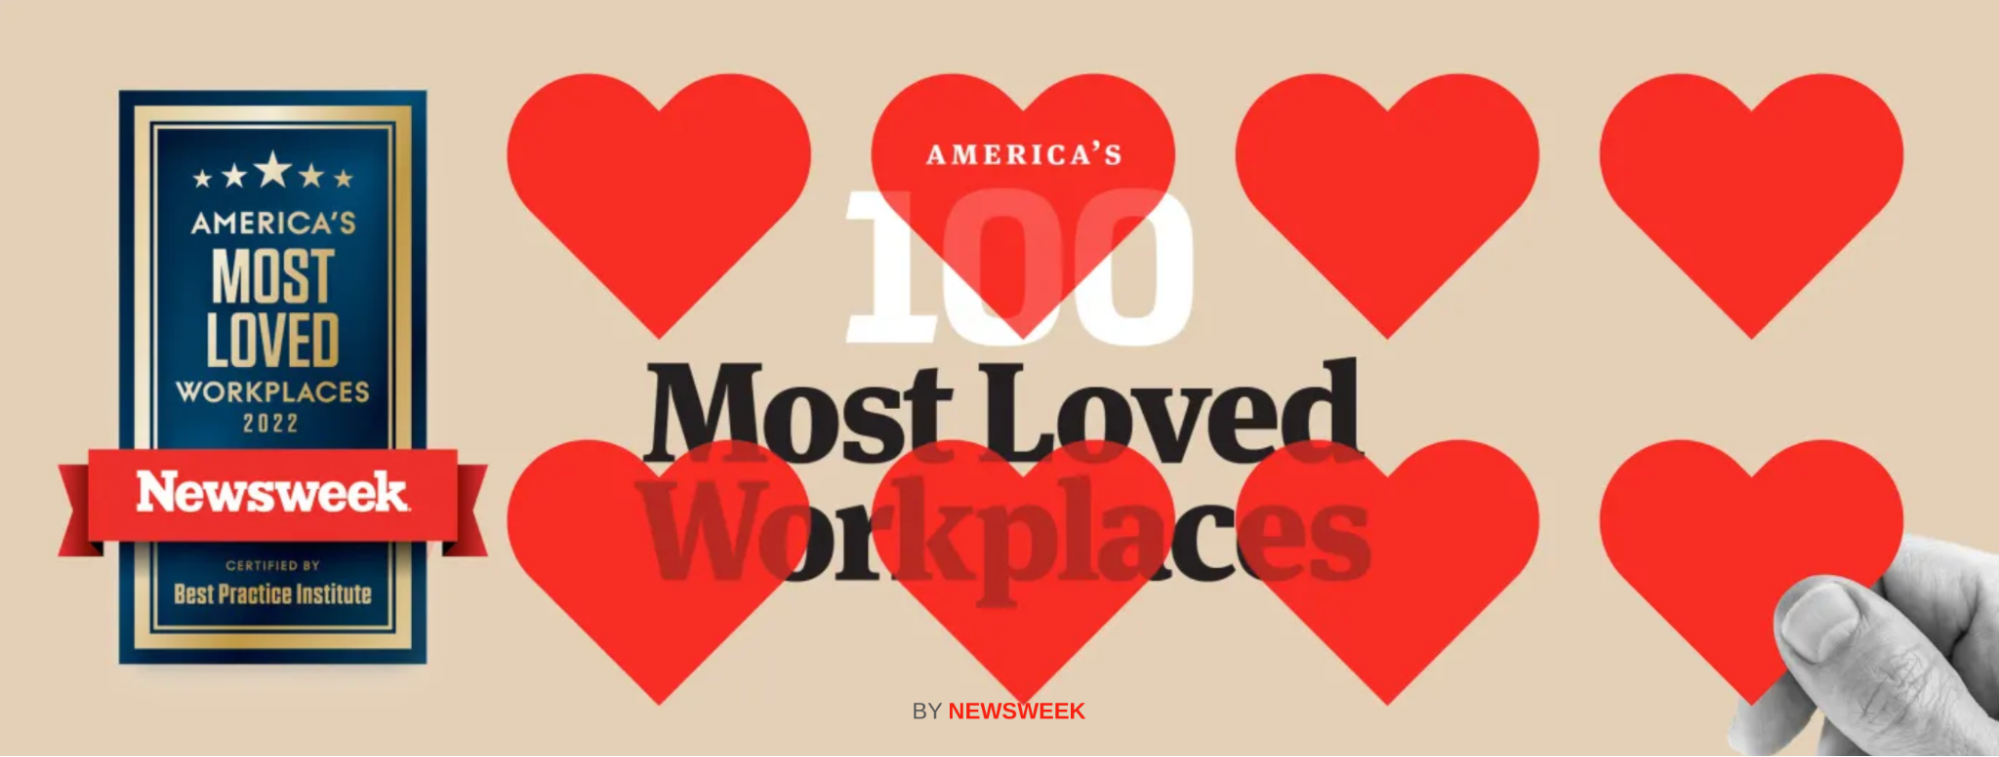 Why Cloudflare’s one of the Top 100 Most Loved Workplaces in 2022